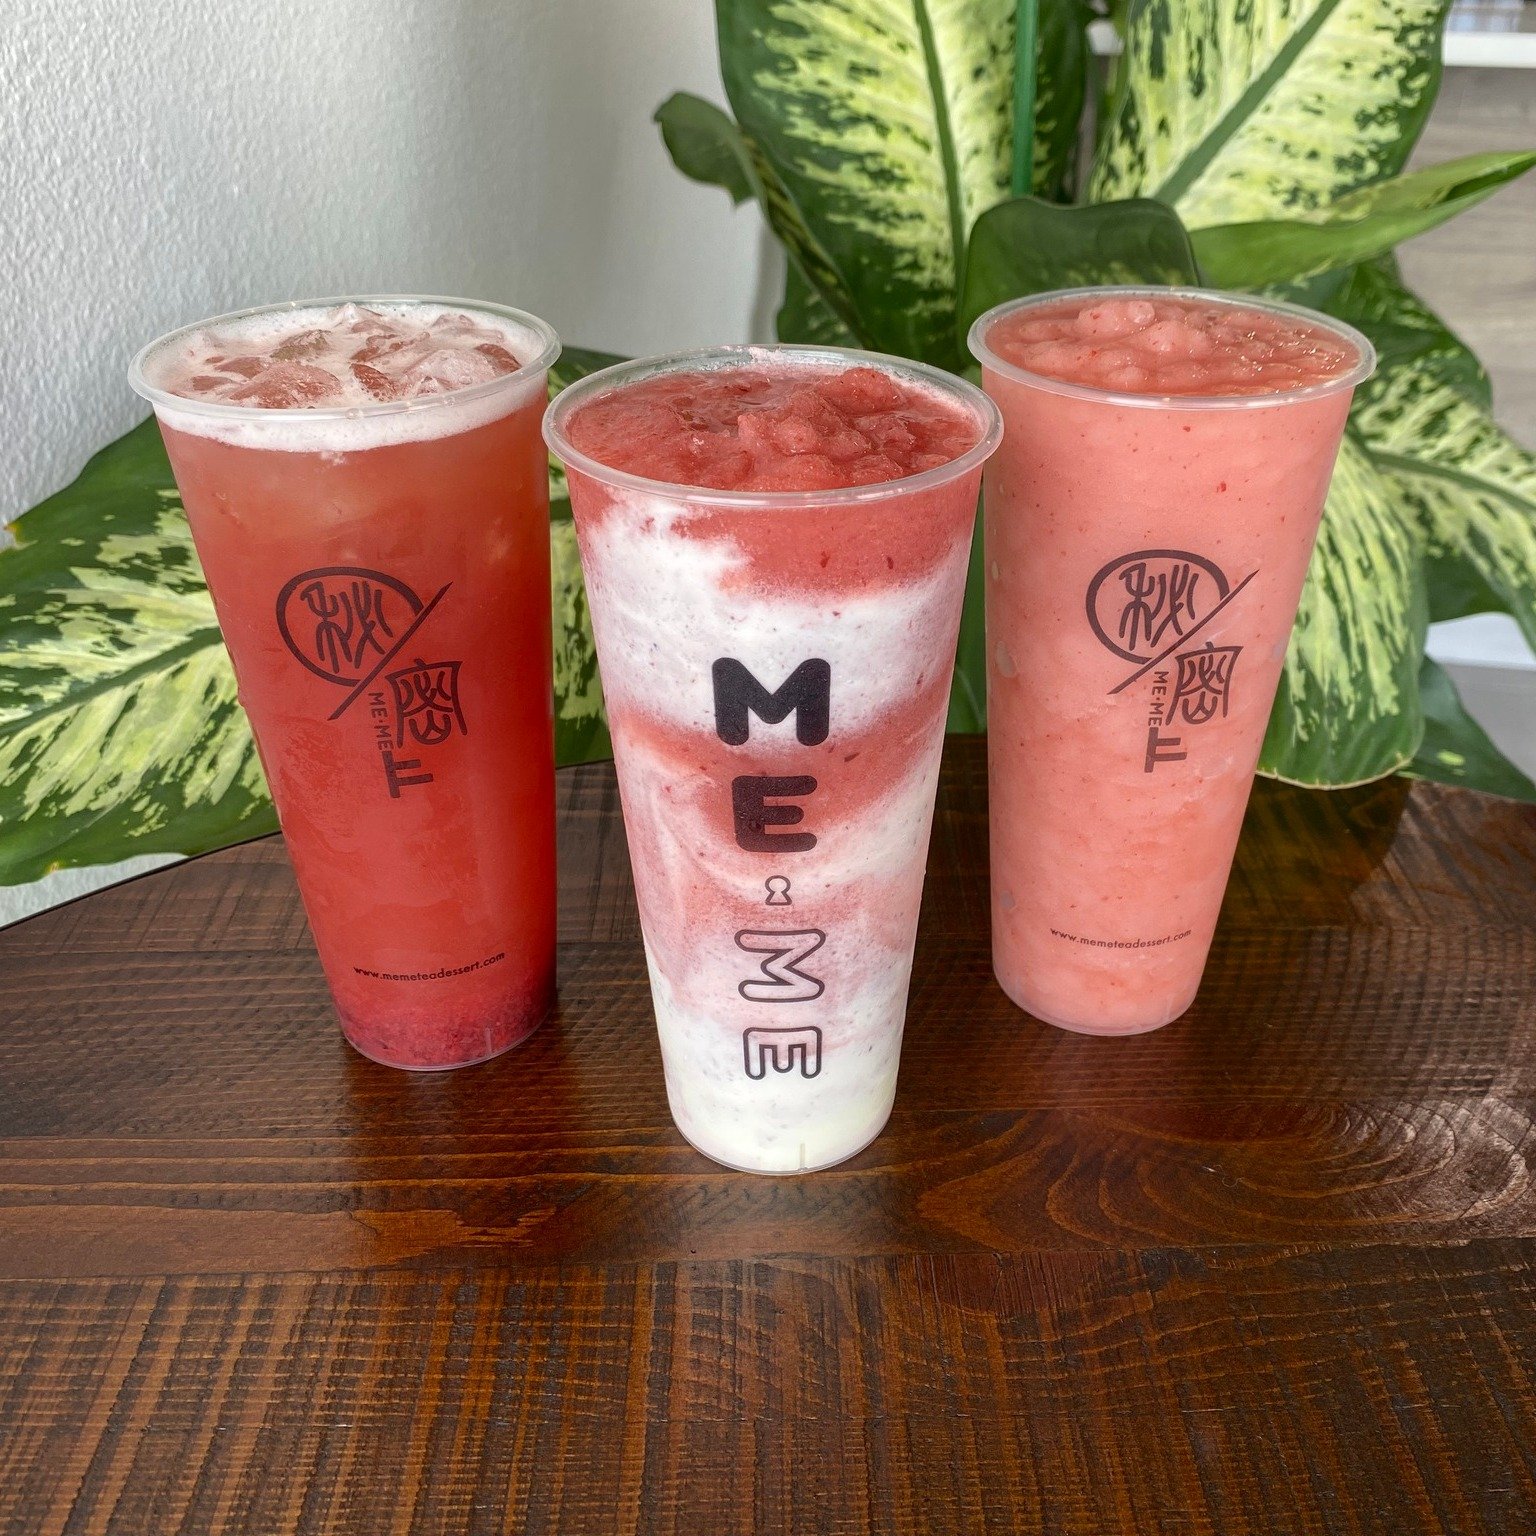 Summer is coming which means it's the perfect time for blended drinks!❄️ Which ones are your go-to flavors? Fruity🍓 or cookie🍪

‼️OPEN DAILY AT 8:30AM!⏰ Closed Tuesdays
🔑Happiness starts with Me&middot;Me
📱Link in bio to order online!

#SupportLo